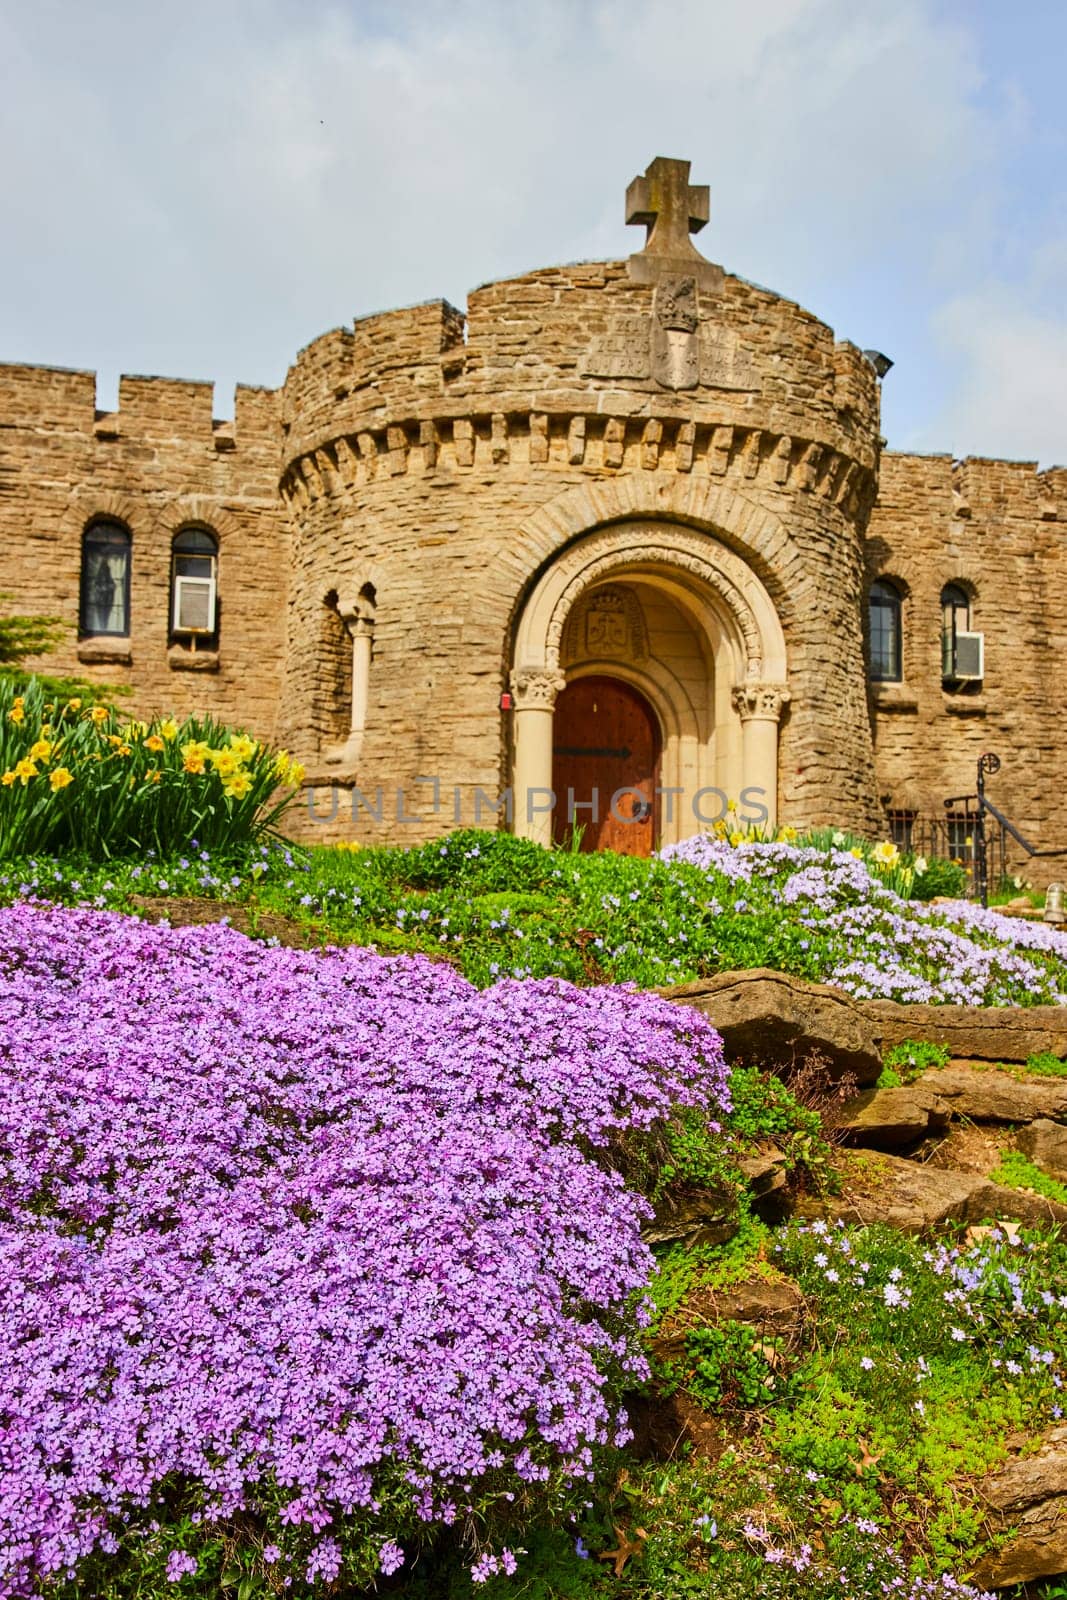 Spring blossoms adorn historical Bishop Simon Brute College Castle in Indianapolis, a symbol of religious heritage and architectural grandeur.